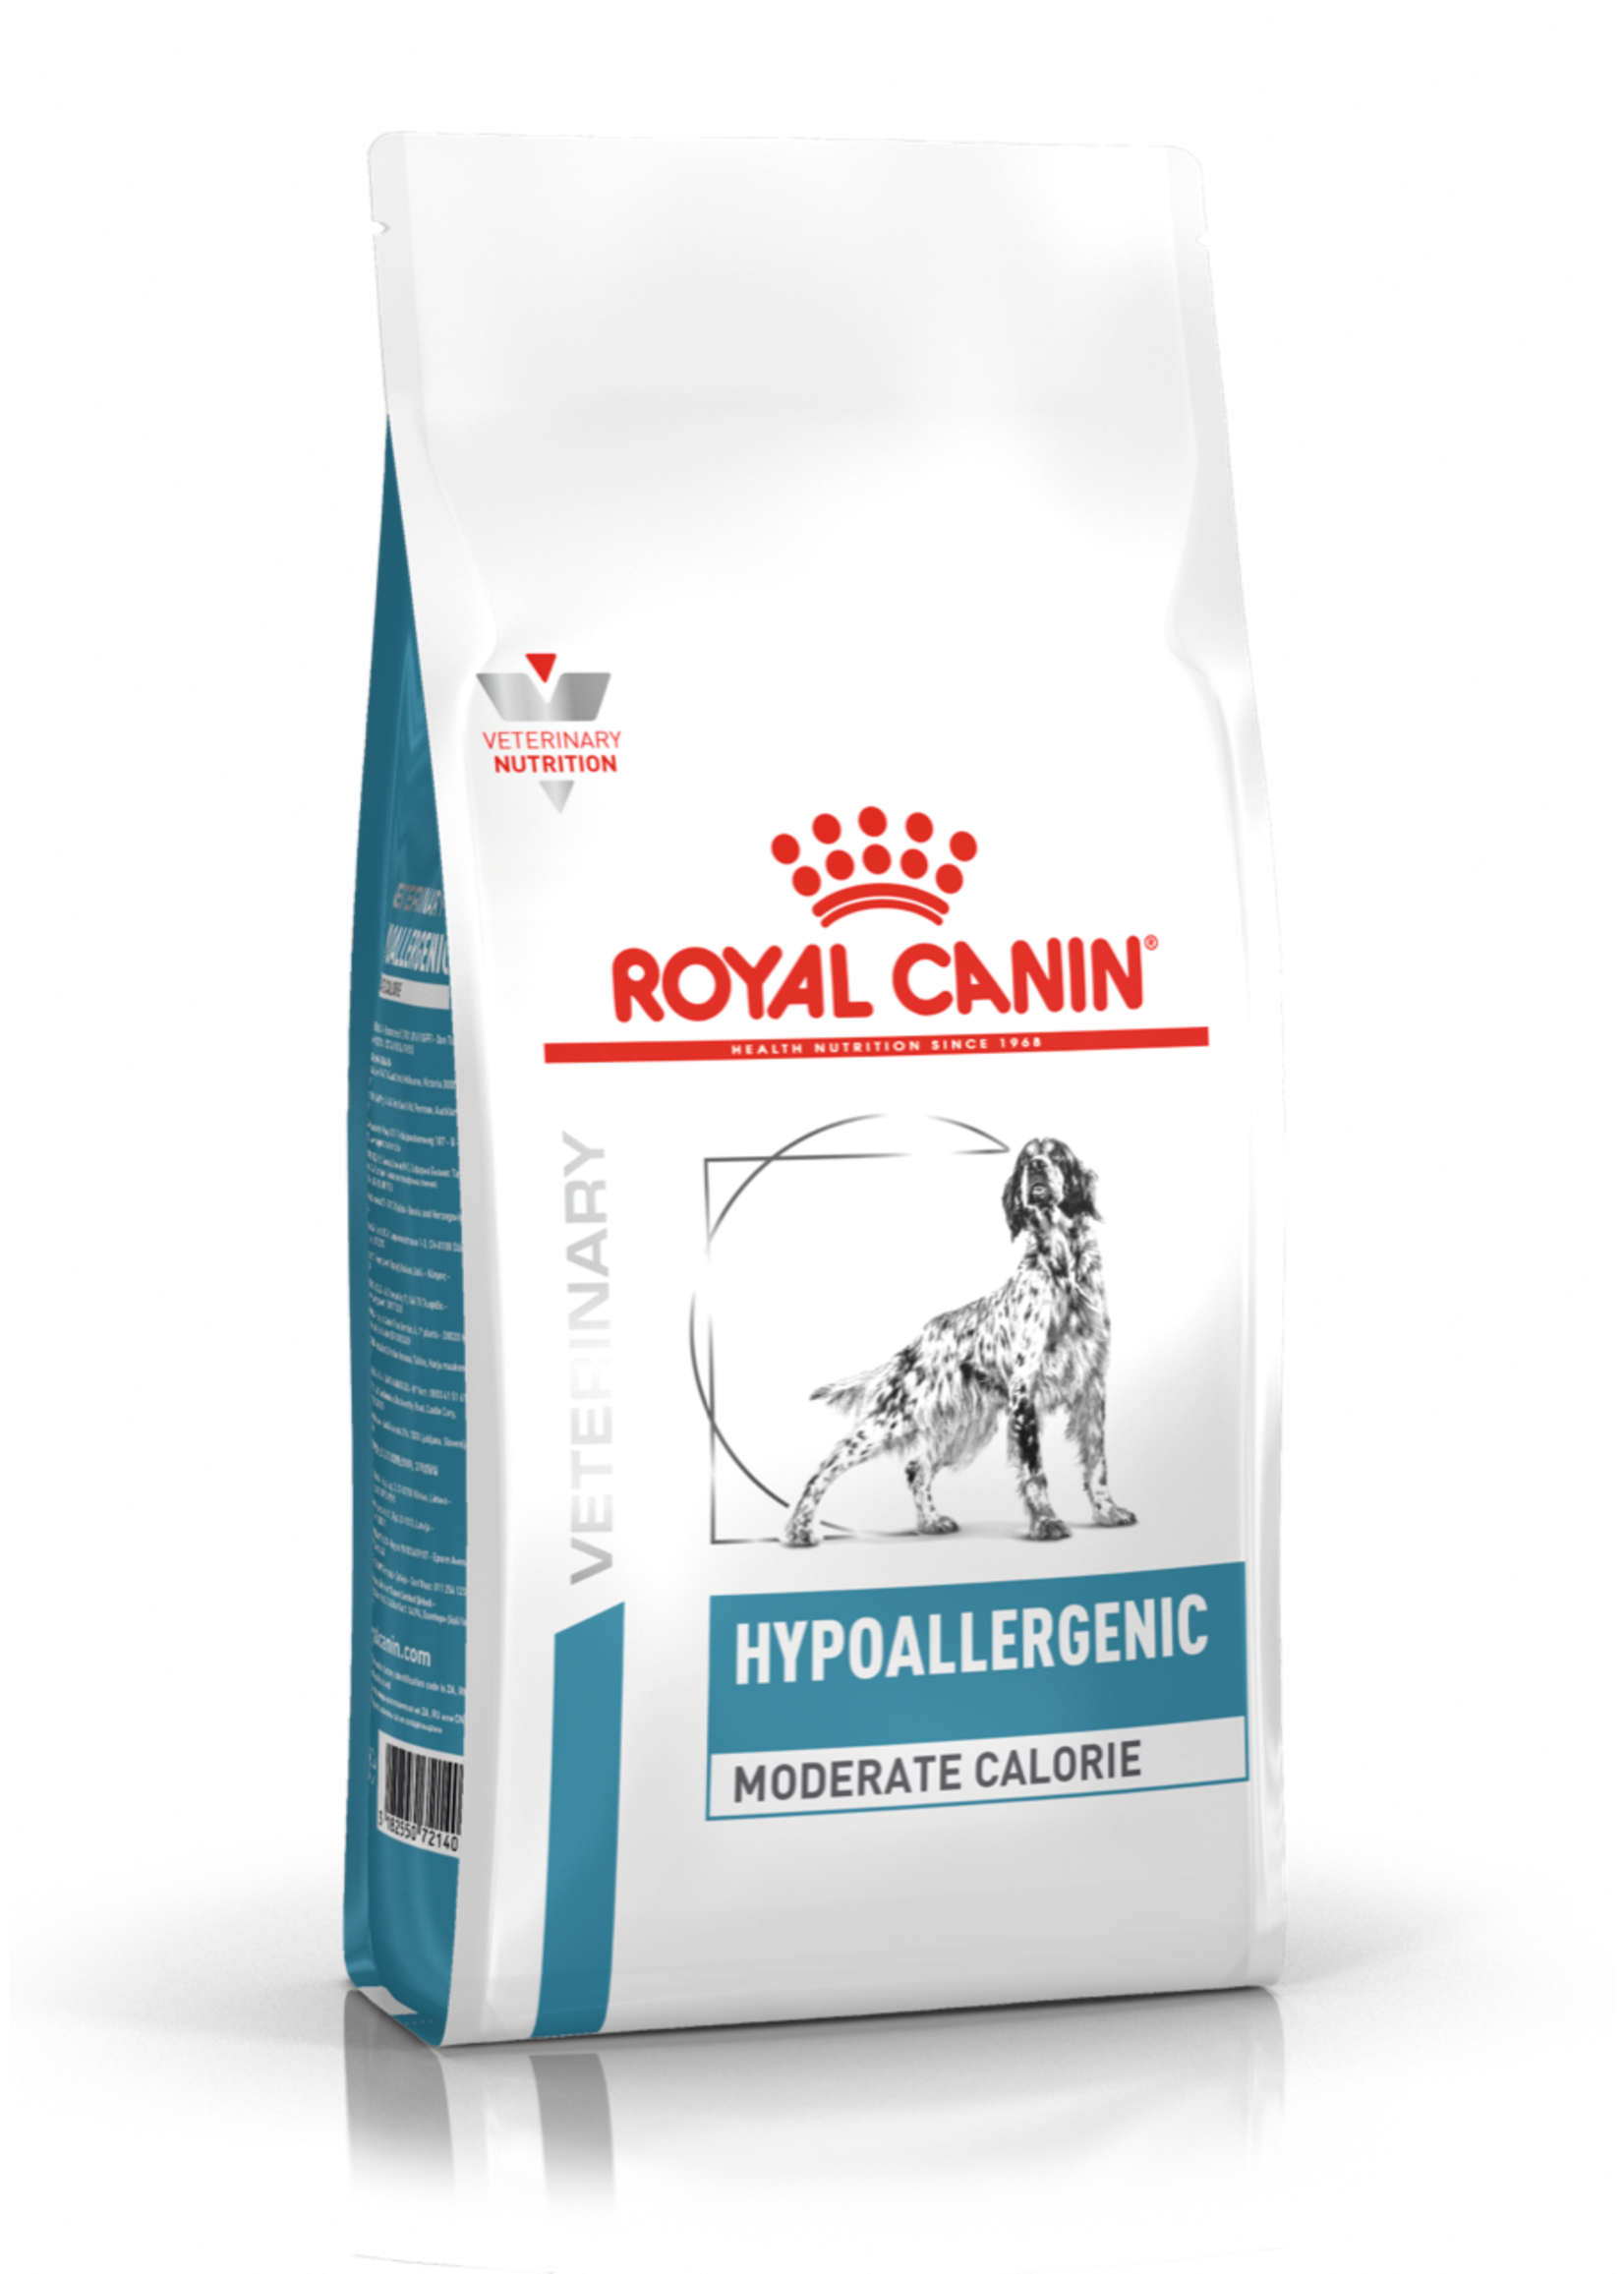 Royal Canin Royal Canin Hypoallergenic Mod Calorie 7kg